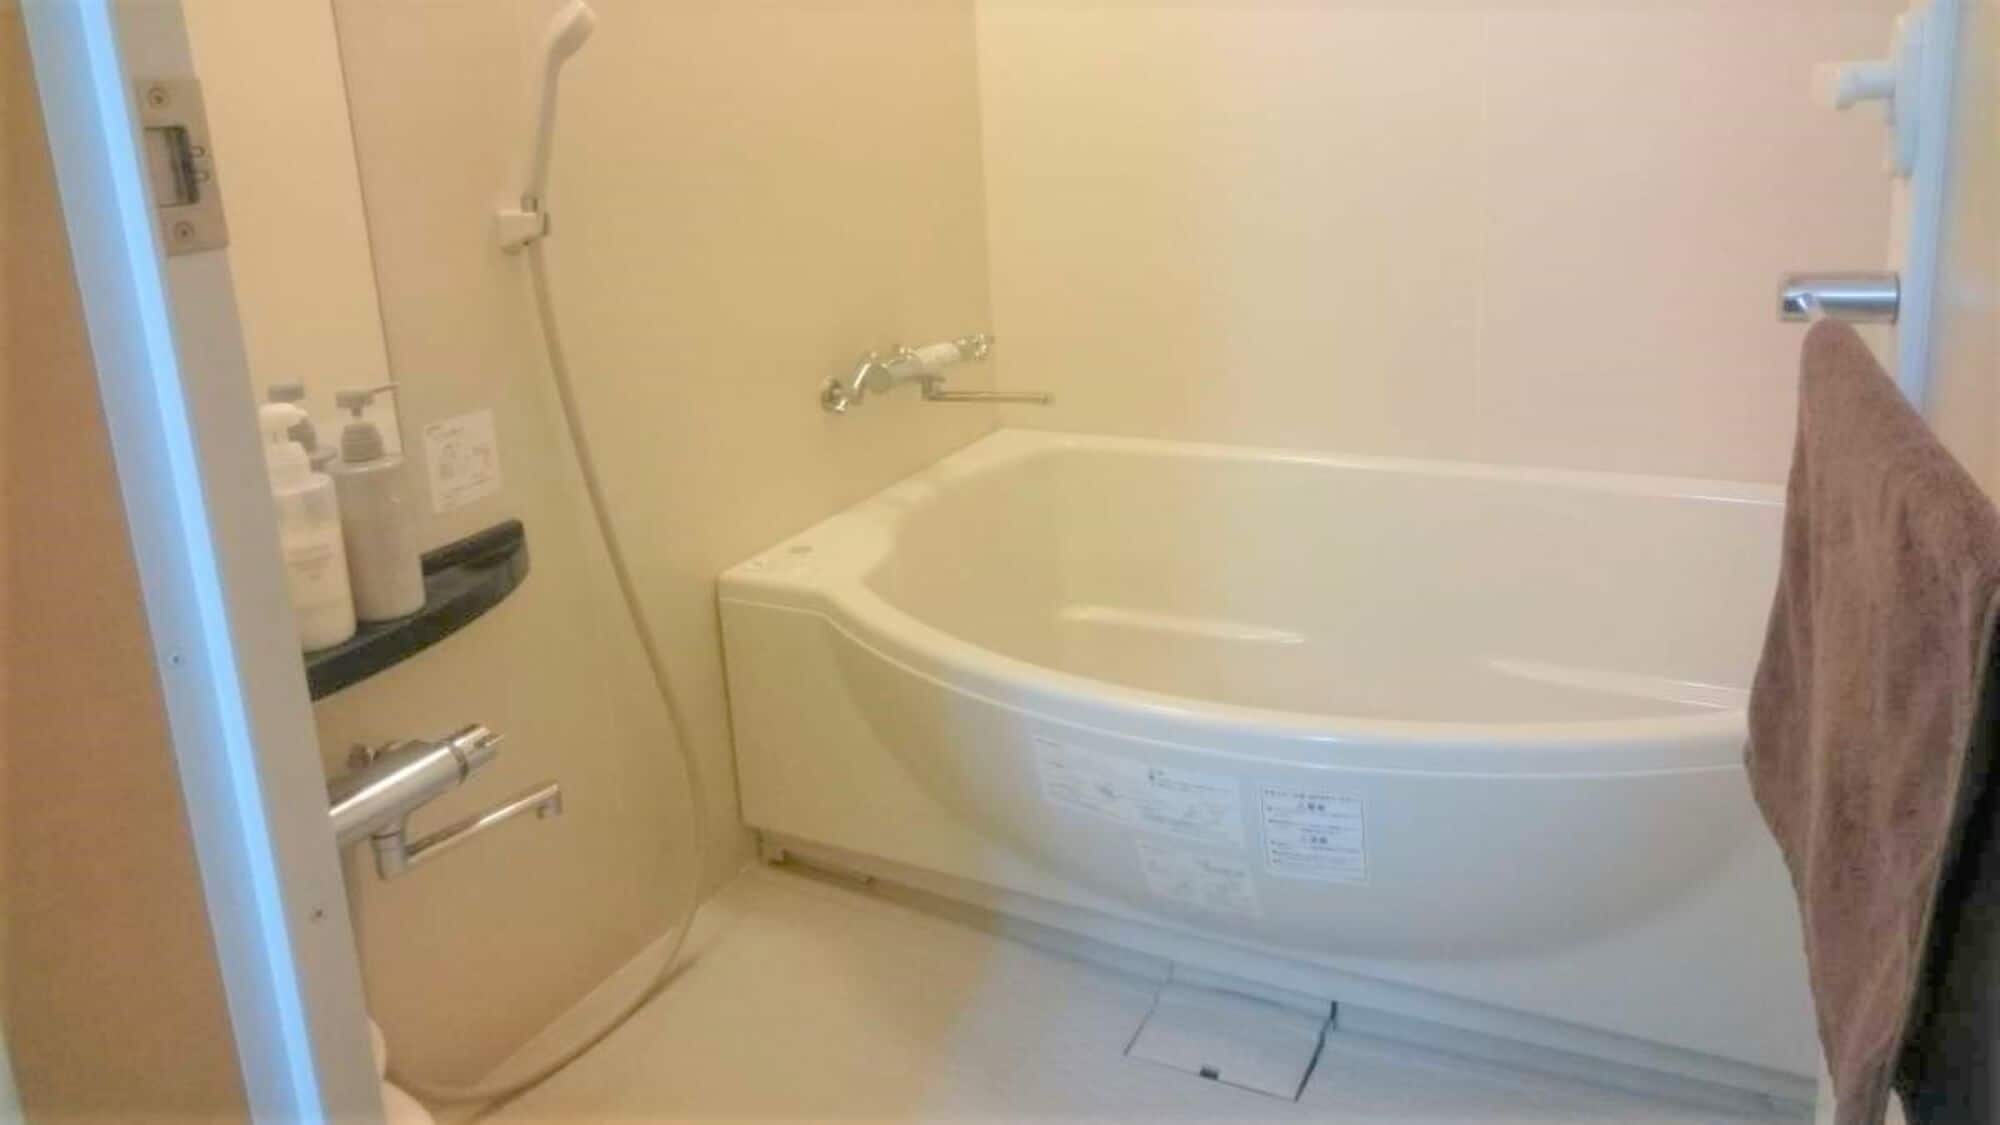 ■ Japanese and Western room 50 square meters bath toilet